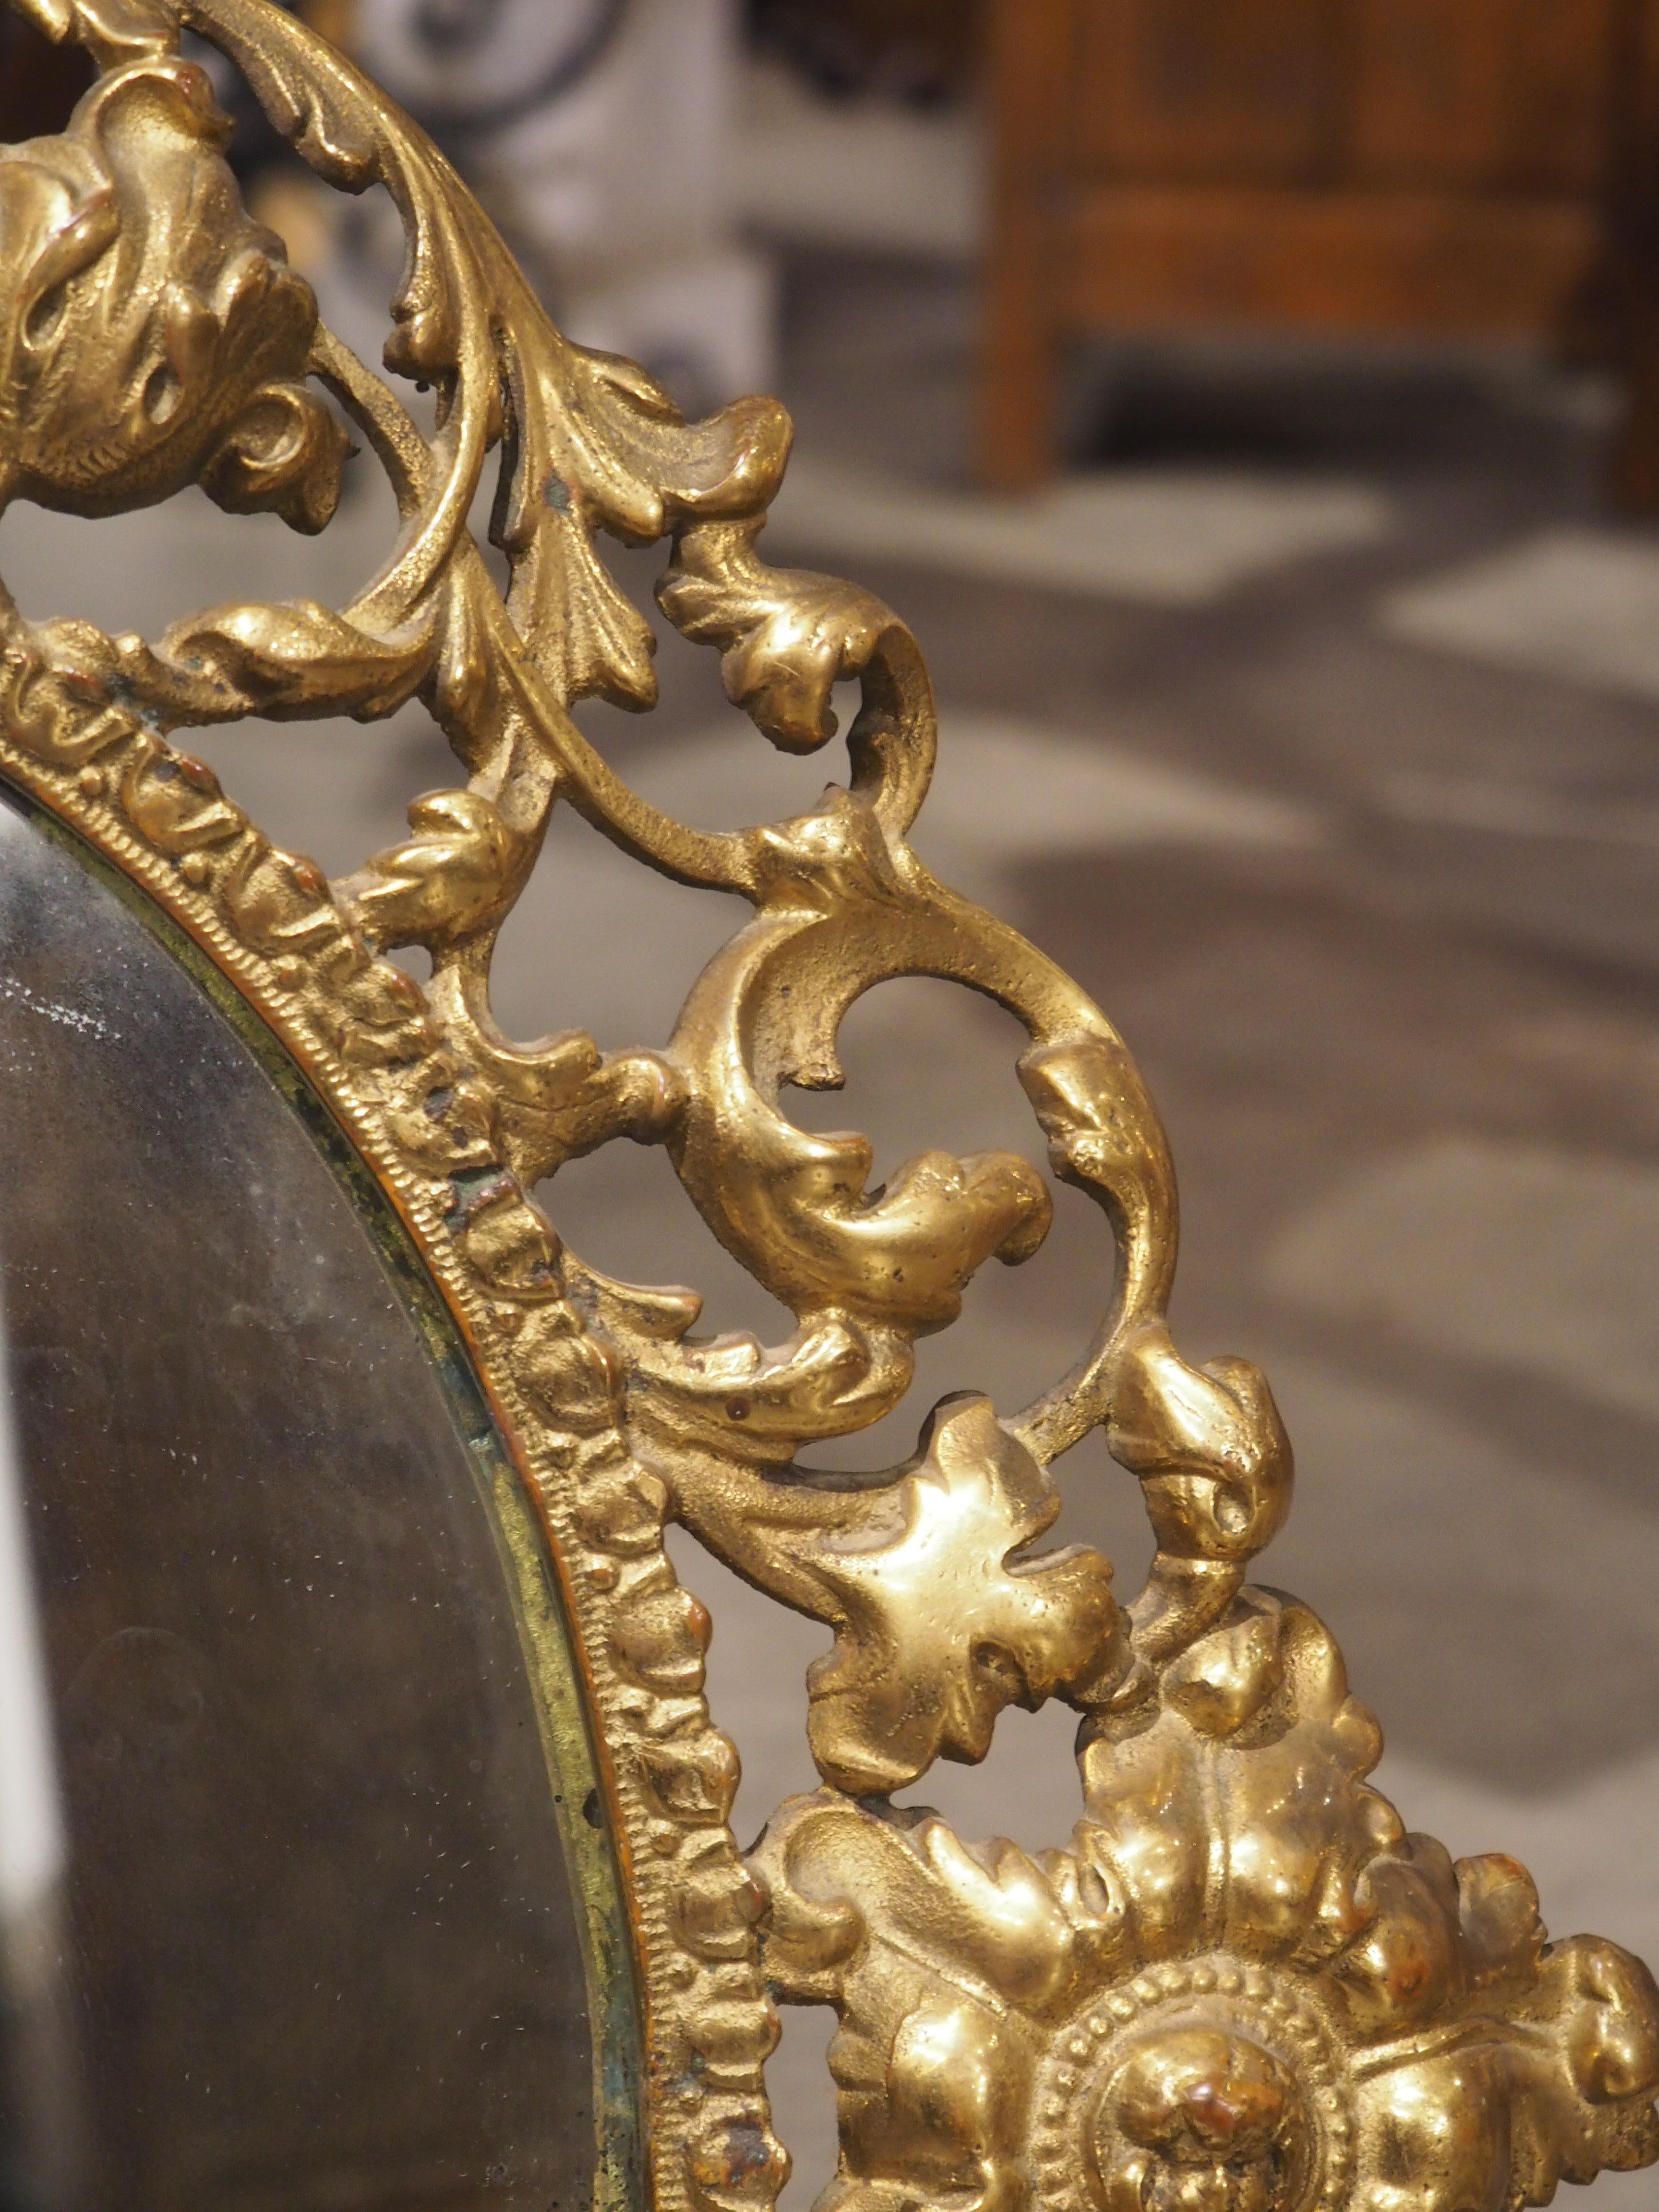 Circa 1900 Oval Gilt Bronze Table Mirror from Italy For Sale 4